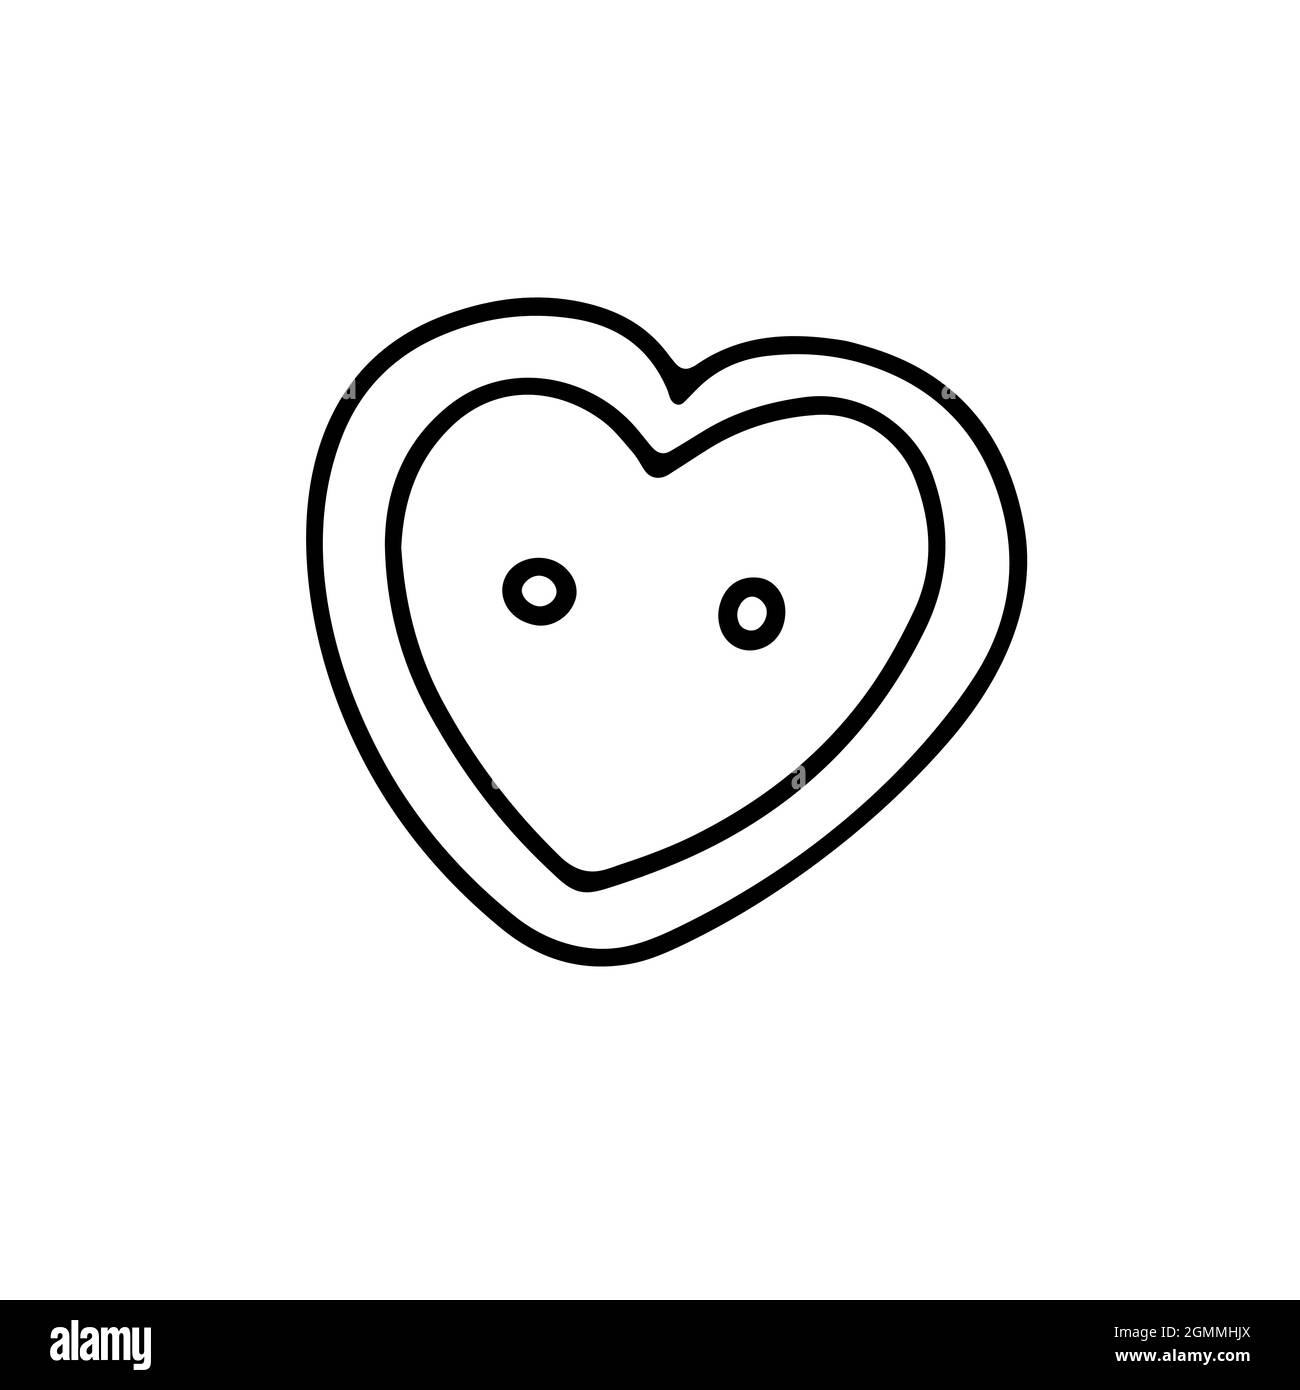 Vector heart-shaped button isolated on white background. Doodle illustration for weddings, t-shirts, Valentines Day. Sketch Sign of love, romance, fee Stock Vector